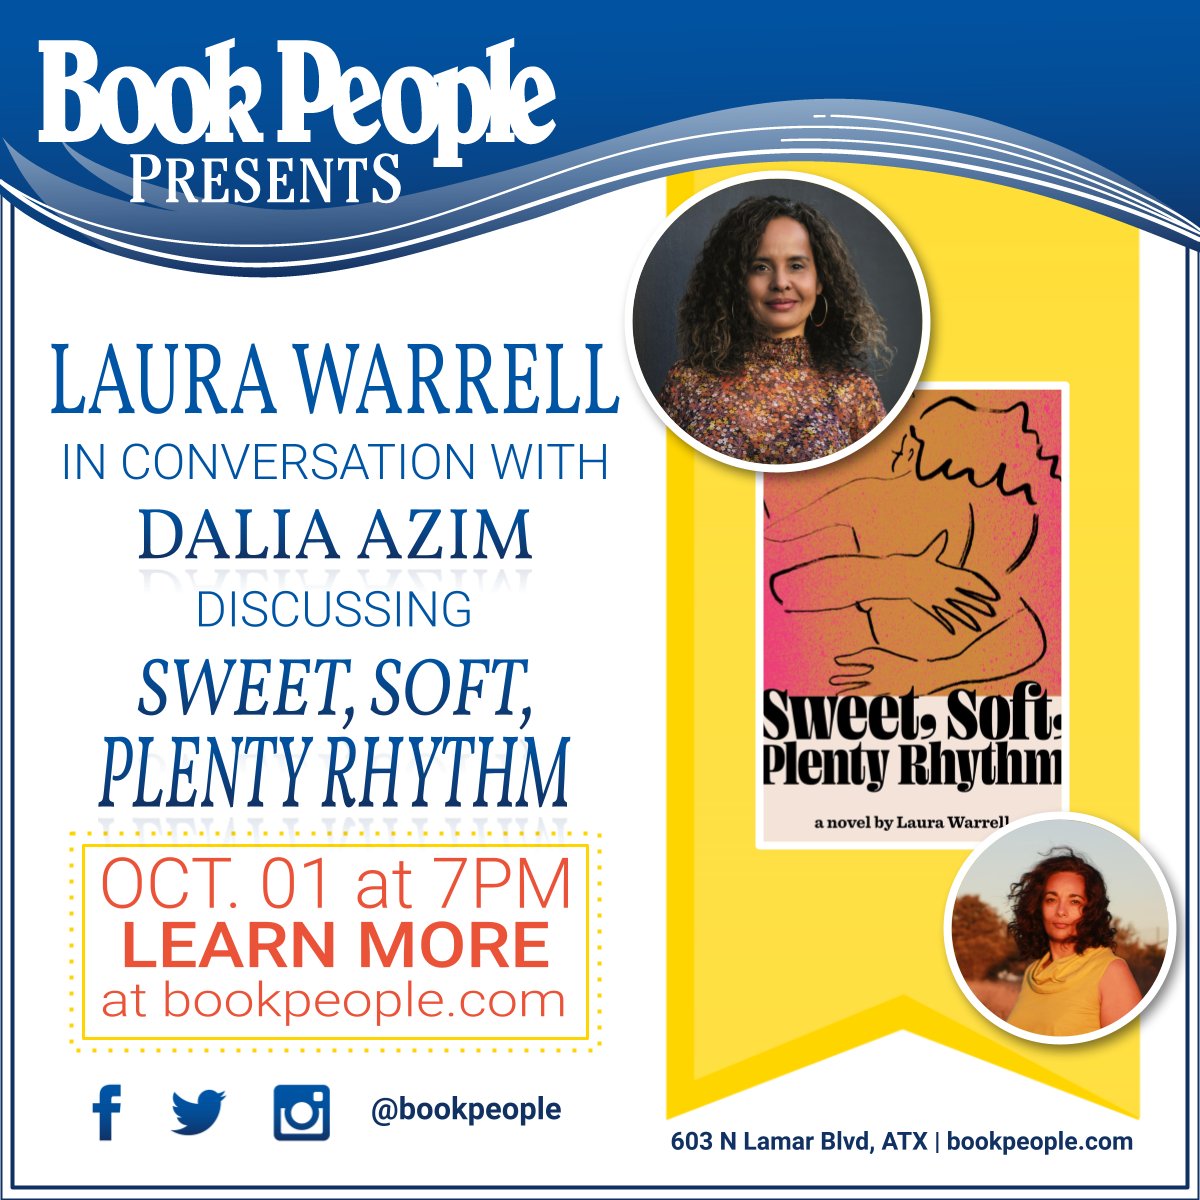 Join us on Saturday, October 1 to celebrate Laura Warrell and SWEET, SOFT, PLENTY RHYTHM! Celeste Ng called it a 'gorgeously written debut' about the perennial temptations of dangerous love. how do we find belonging when love is unrequited? Learn more: bookpeople.com/event/laura-wa…